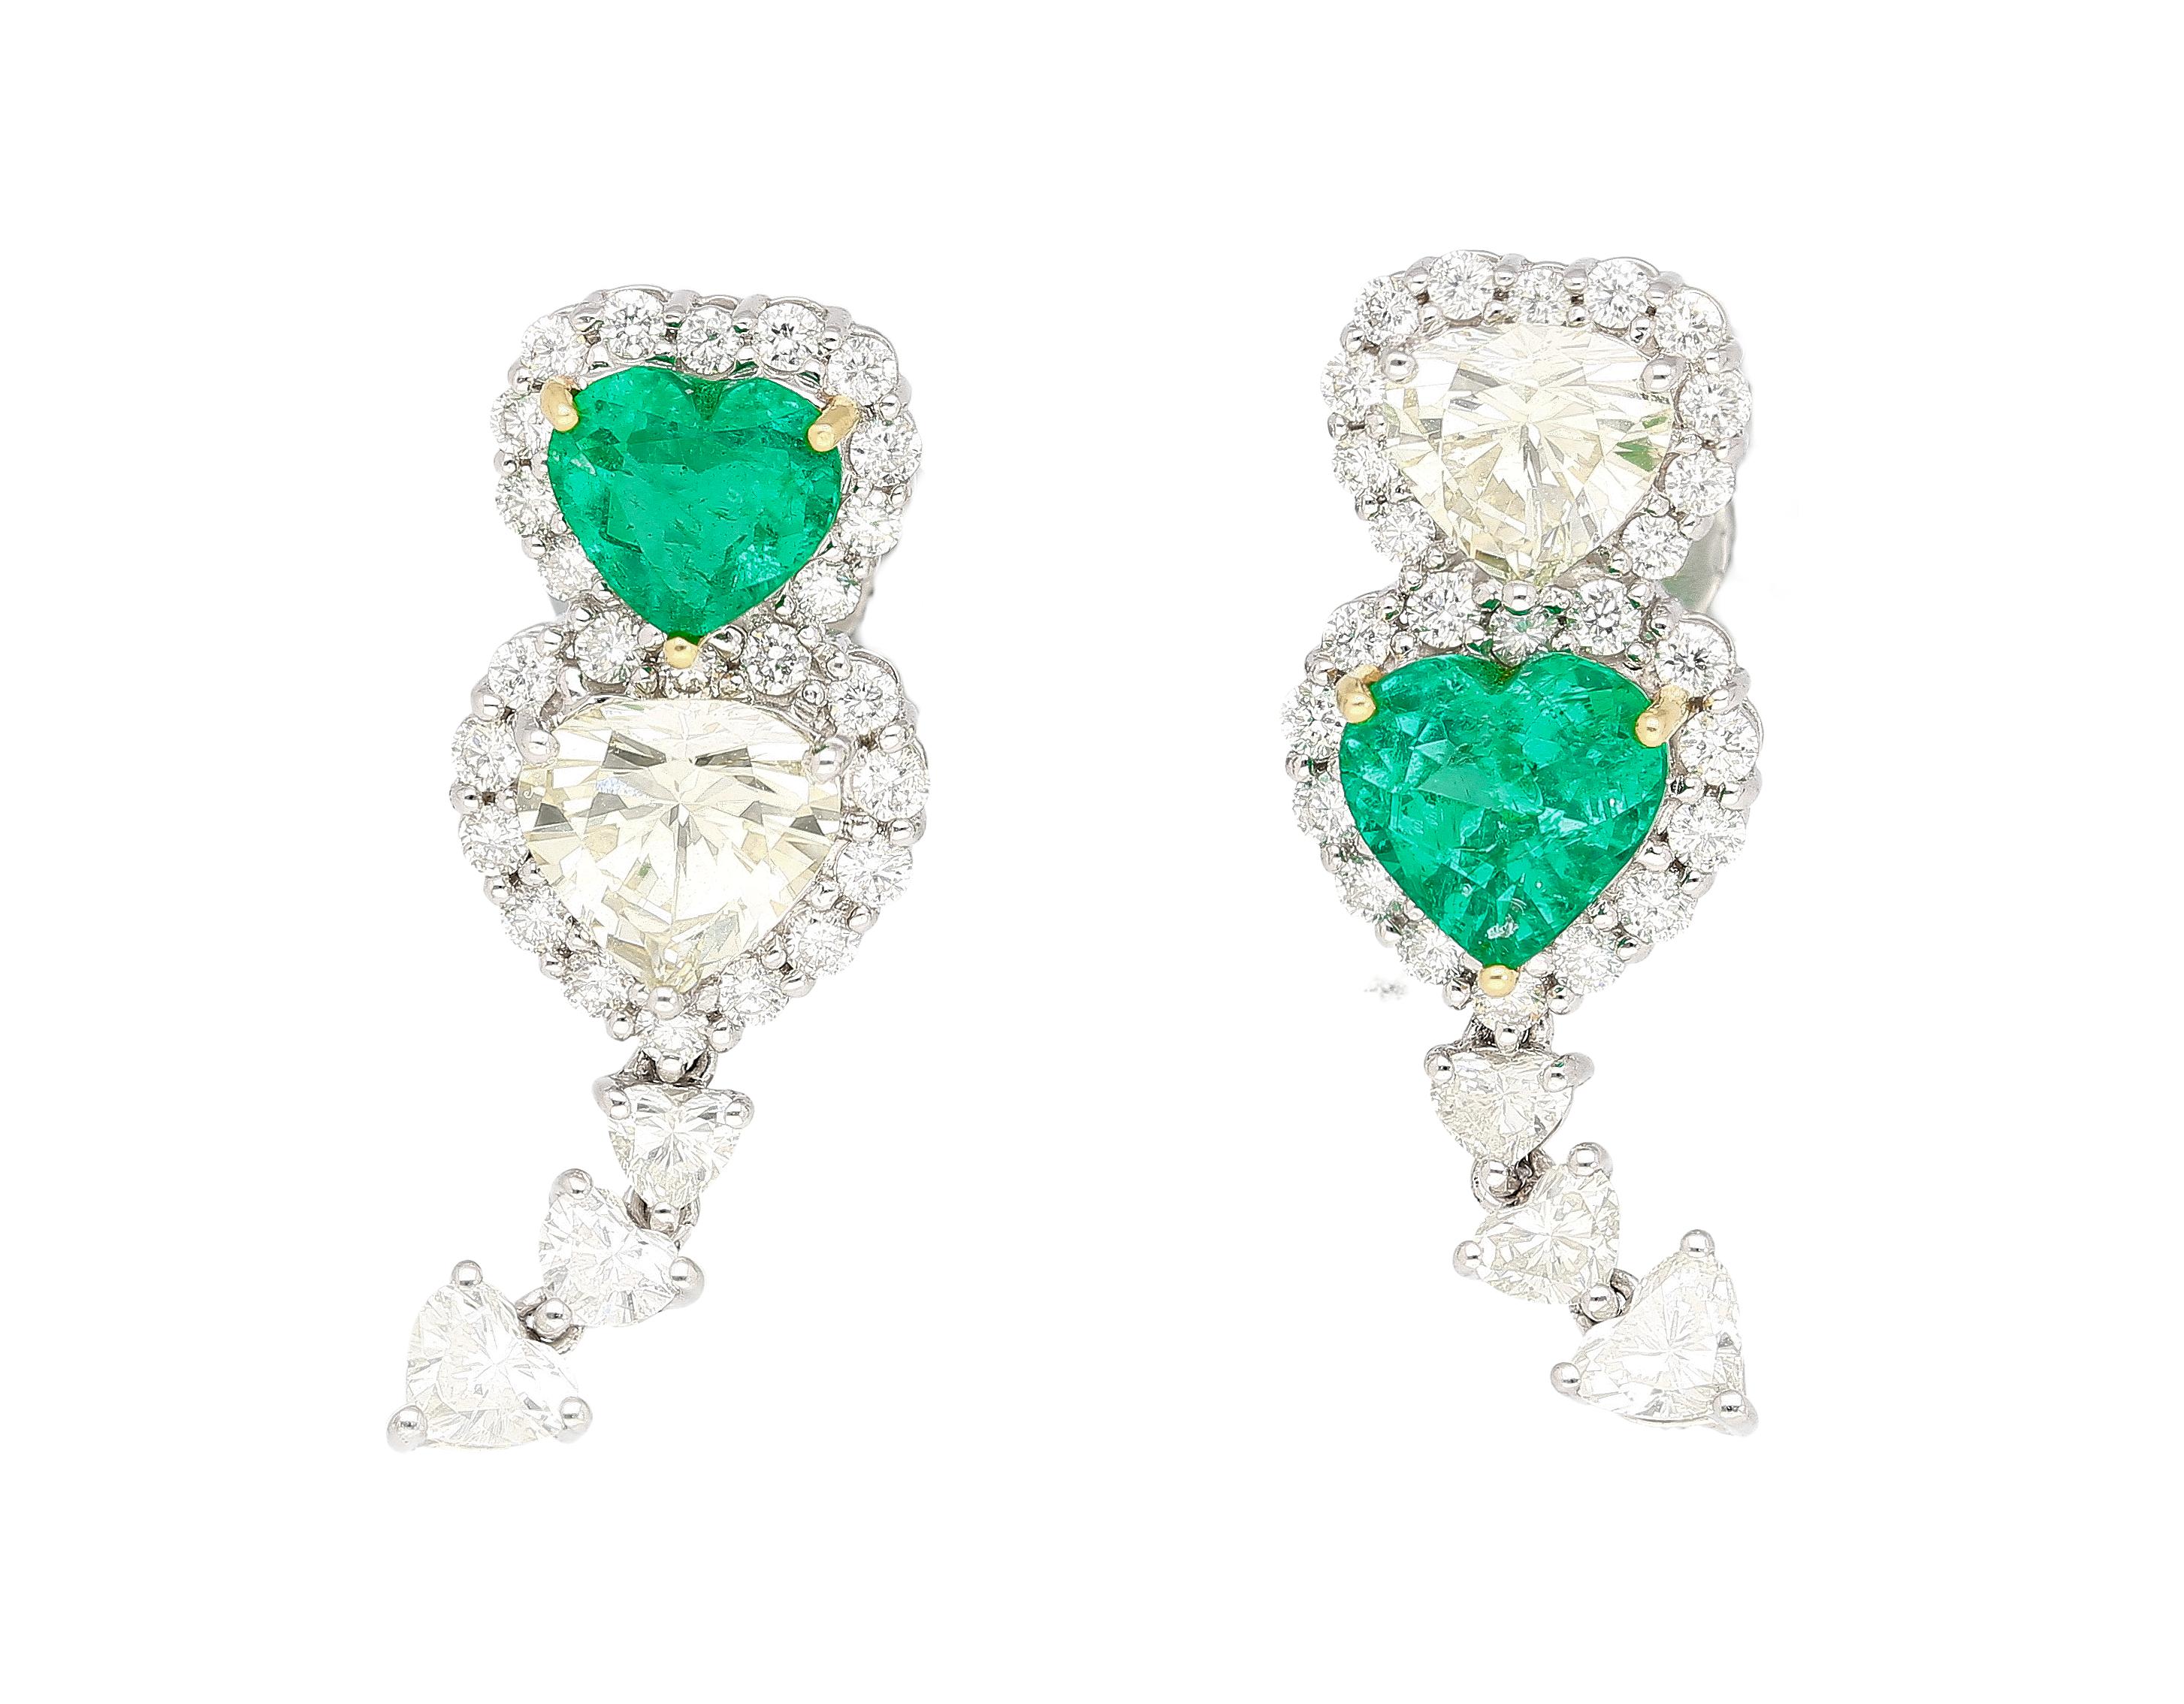 A dazzling mirrored opposite heart motif natural diamond and emerald drop earrings. Set with 1.95 carats in heart-cut emeralds and 3.23 carats in heart-cut diamonds. Handmade with intention and attention to detail. Precisely the color contrast of